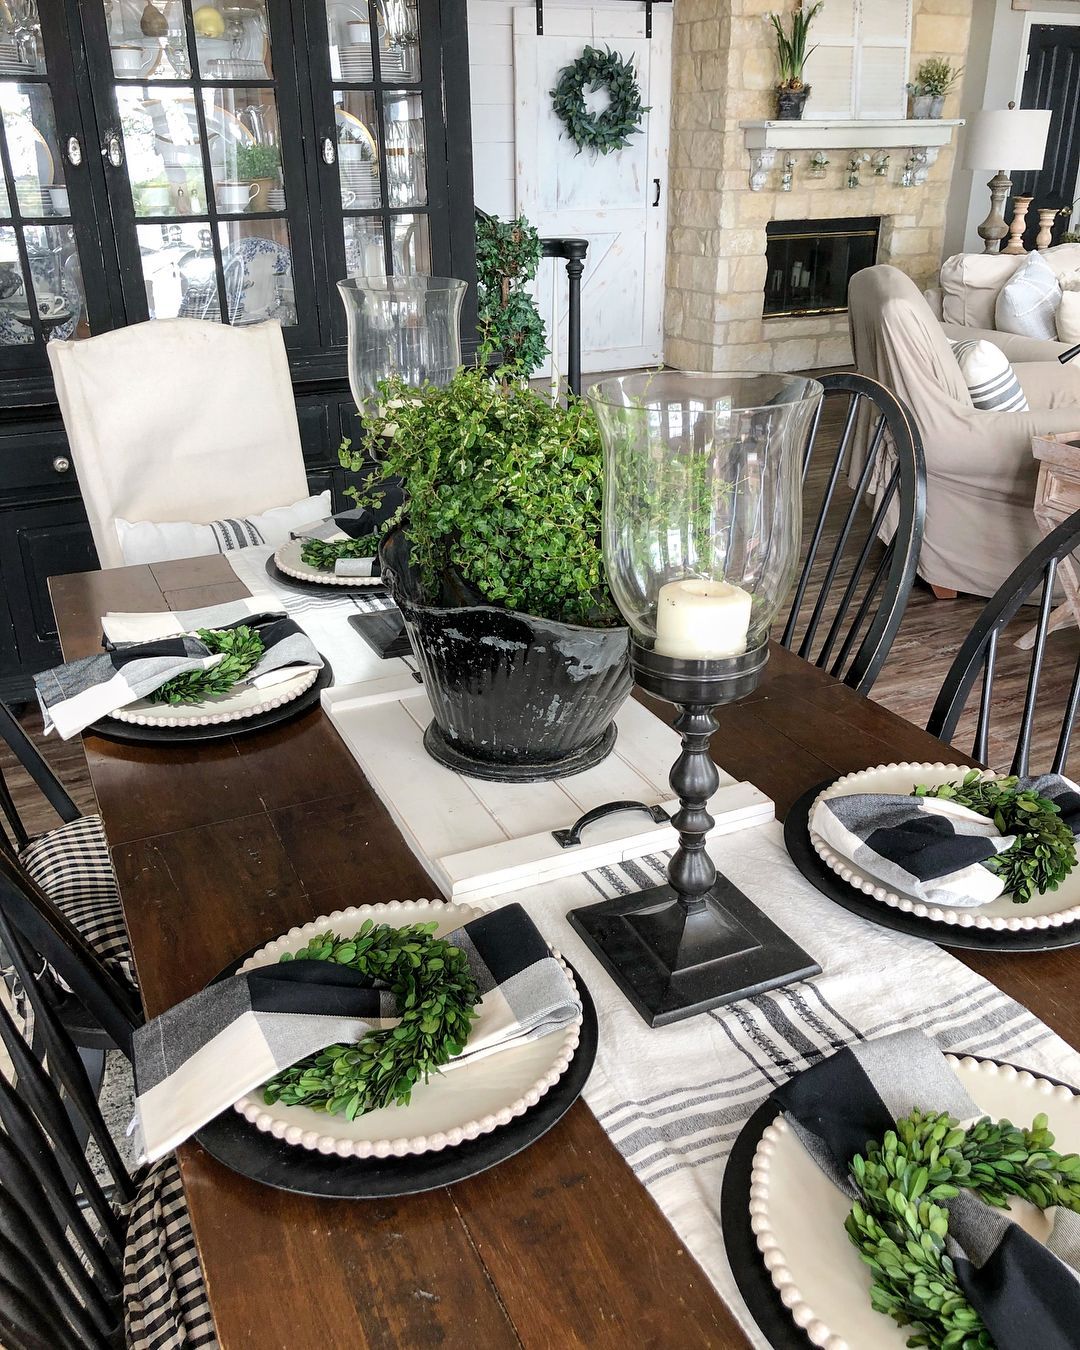 “It’s not easy being green” ~Kermit рџђё With all my neutral, I’m loving the pops of green that plants add. I purchased some real house… -   24 dining decor table
 ideas